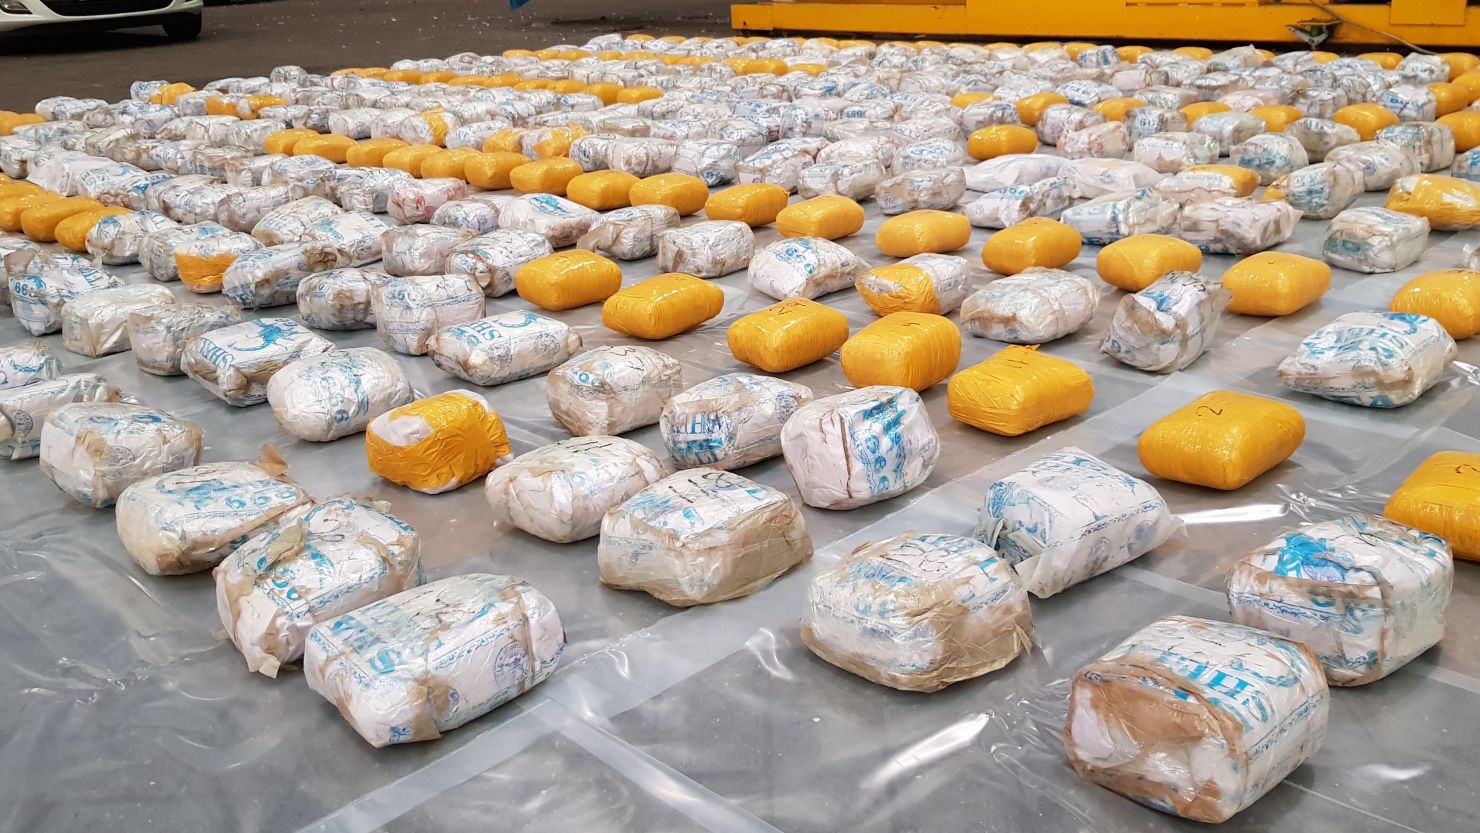 Approximately 398 kilograms of heroin was removed from the shipping container.